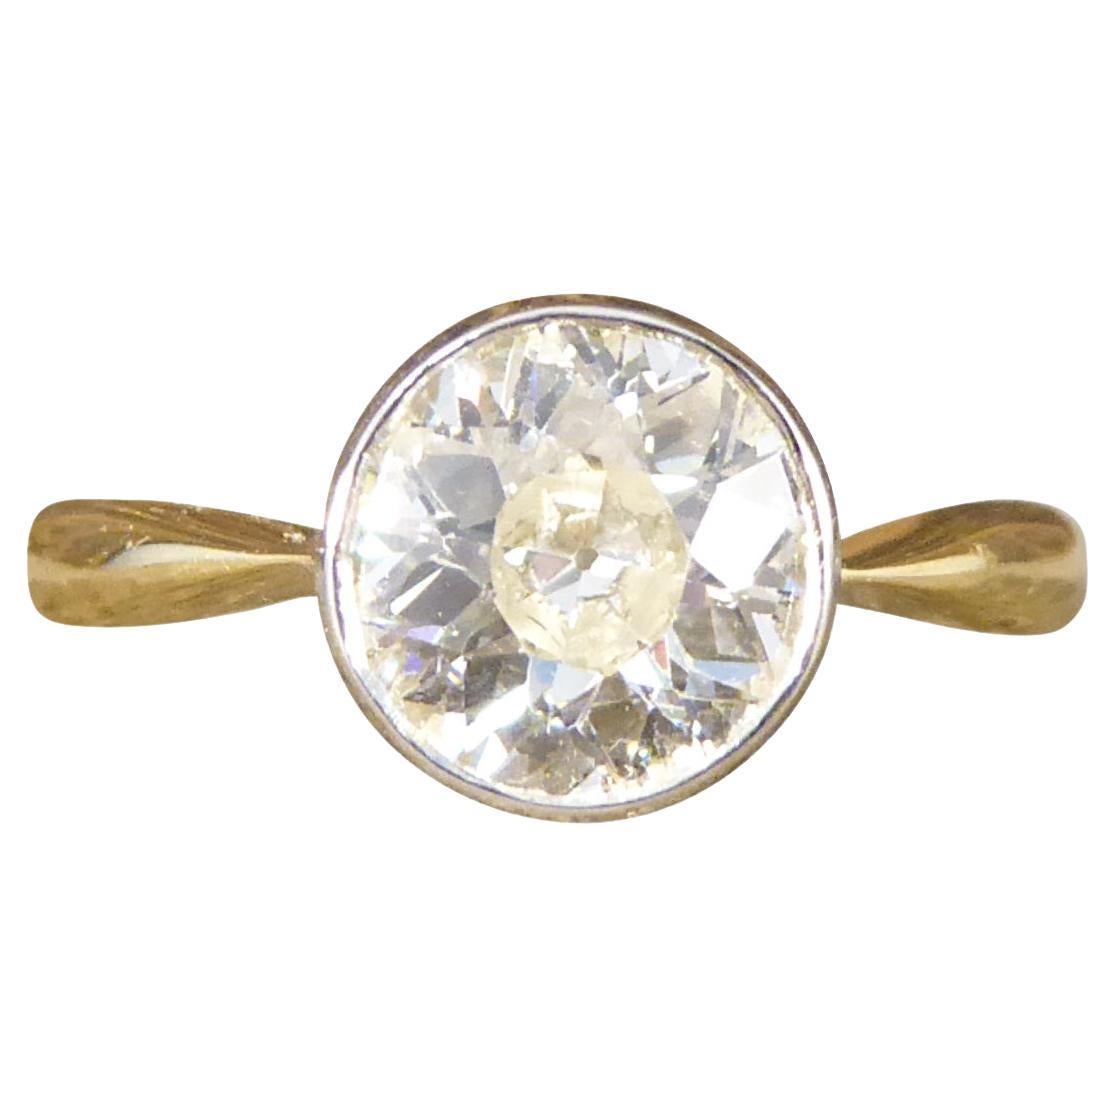 1.25ct Diamond Solitaire Bezel Set Engagement Ring in 18ct Yellow Gold and Plat For Sale